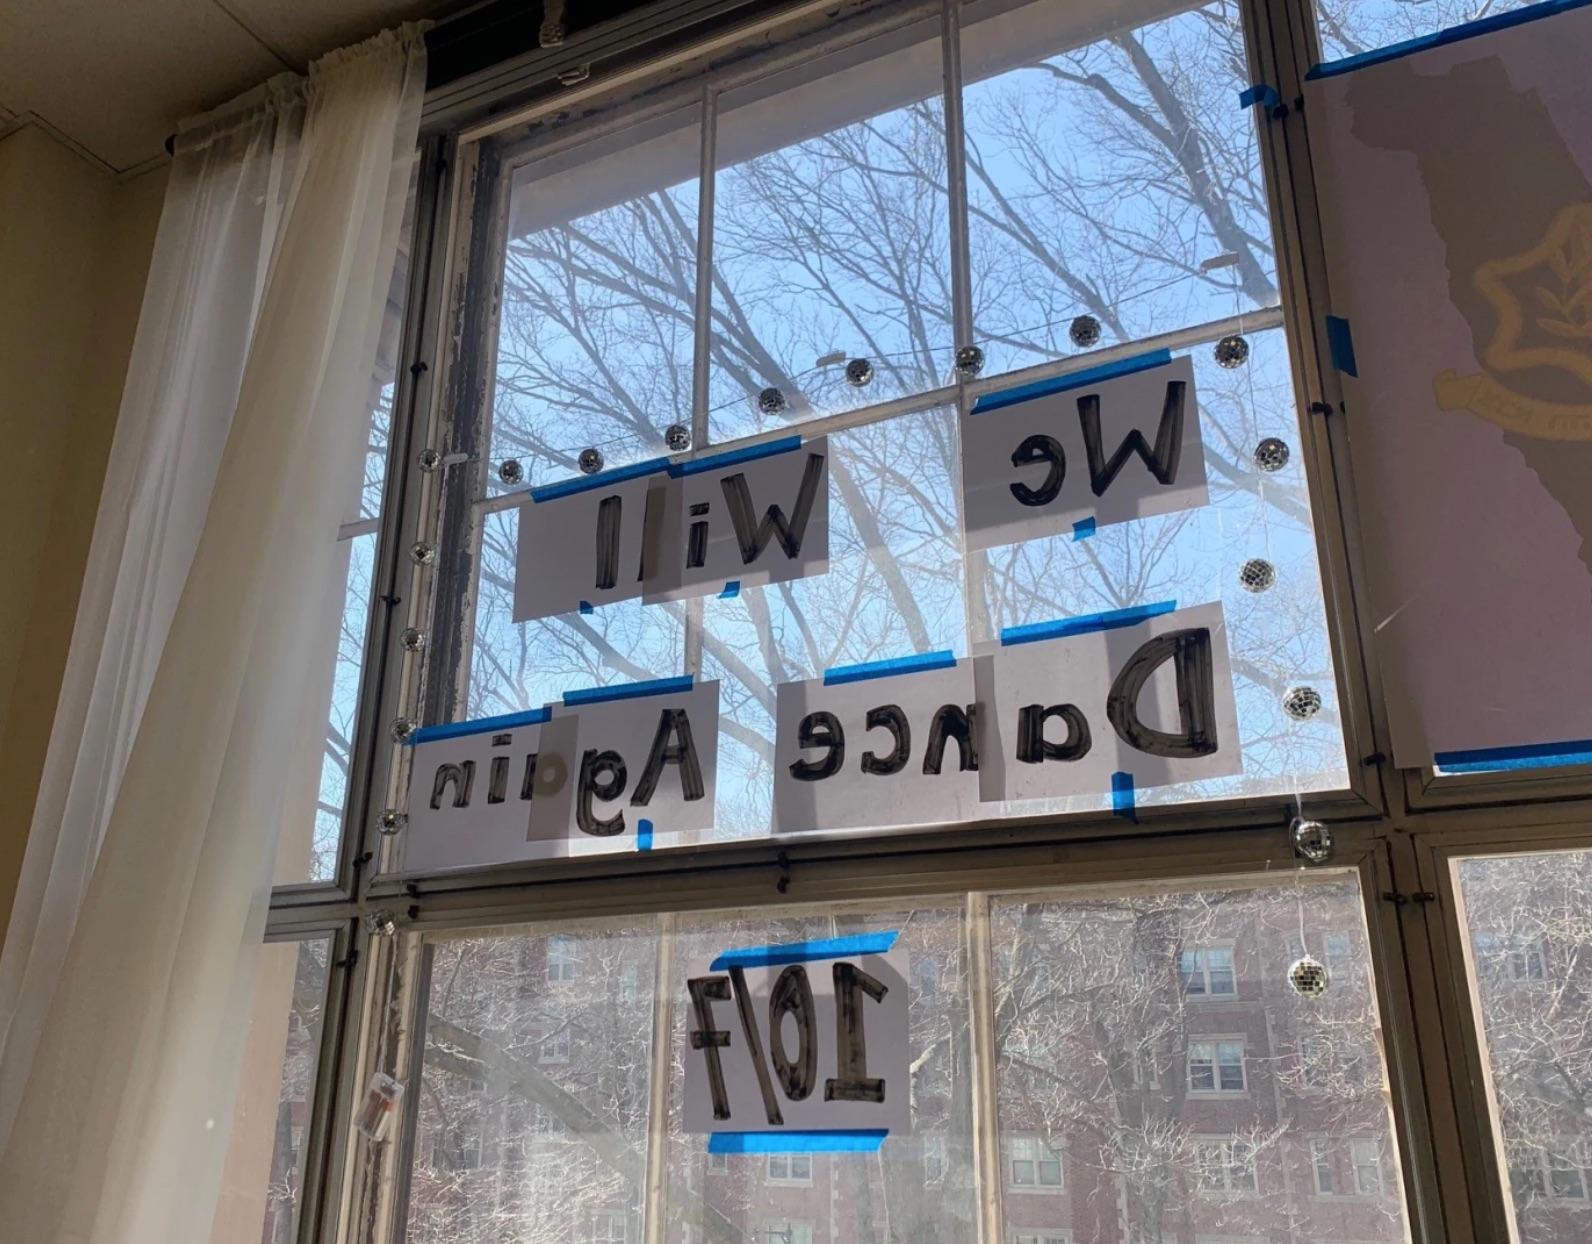 pieces of paper taped to the window with the words 